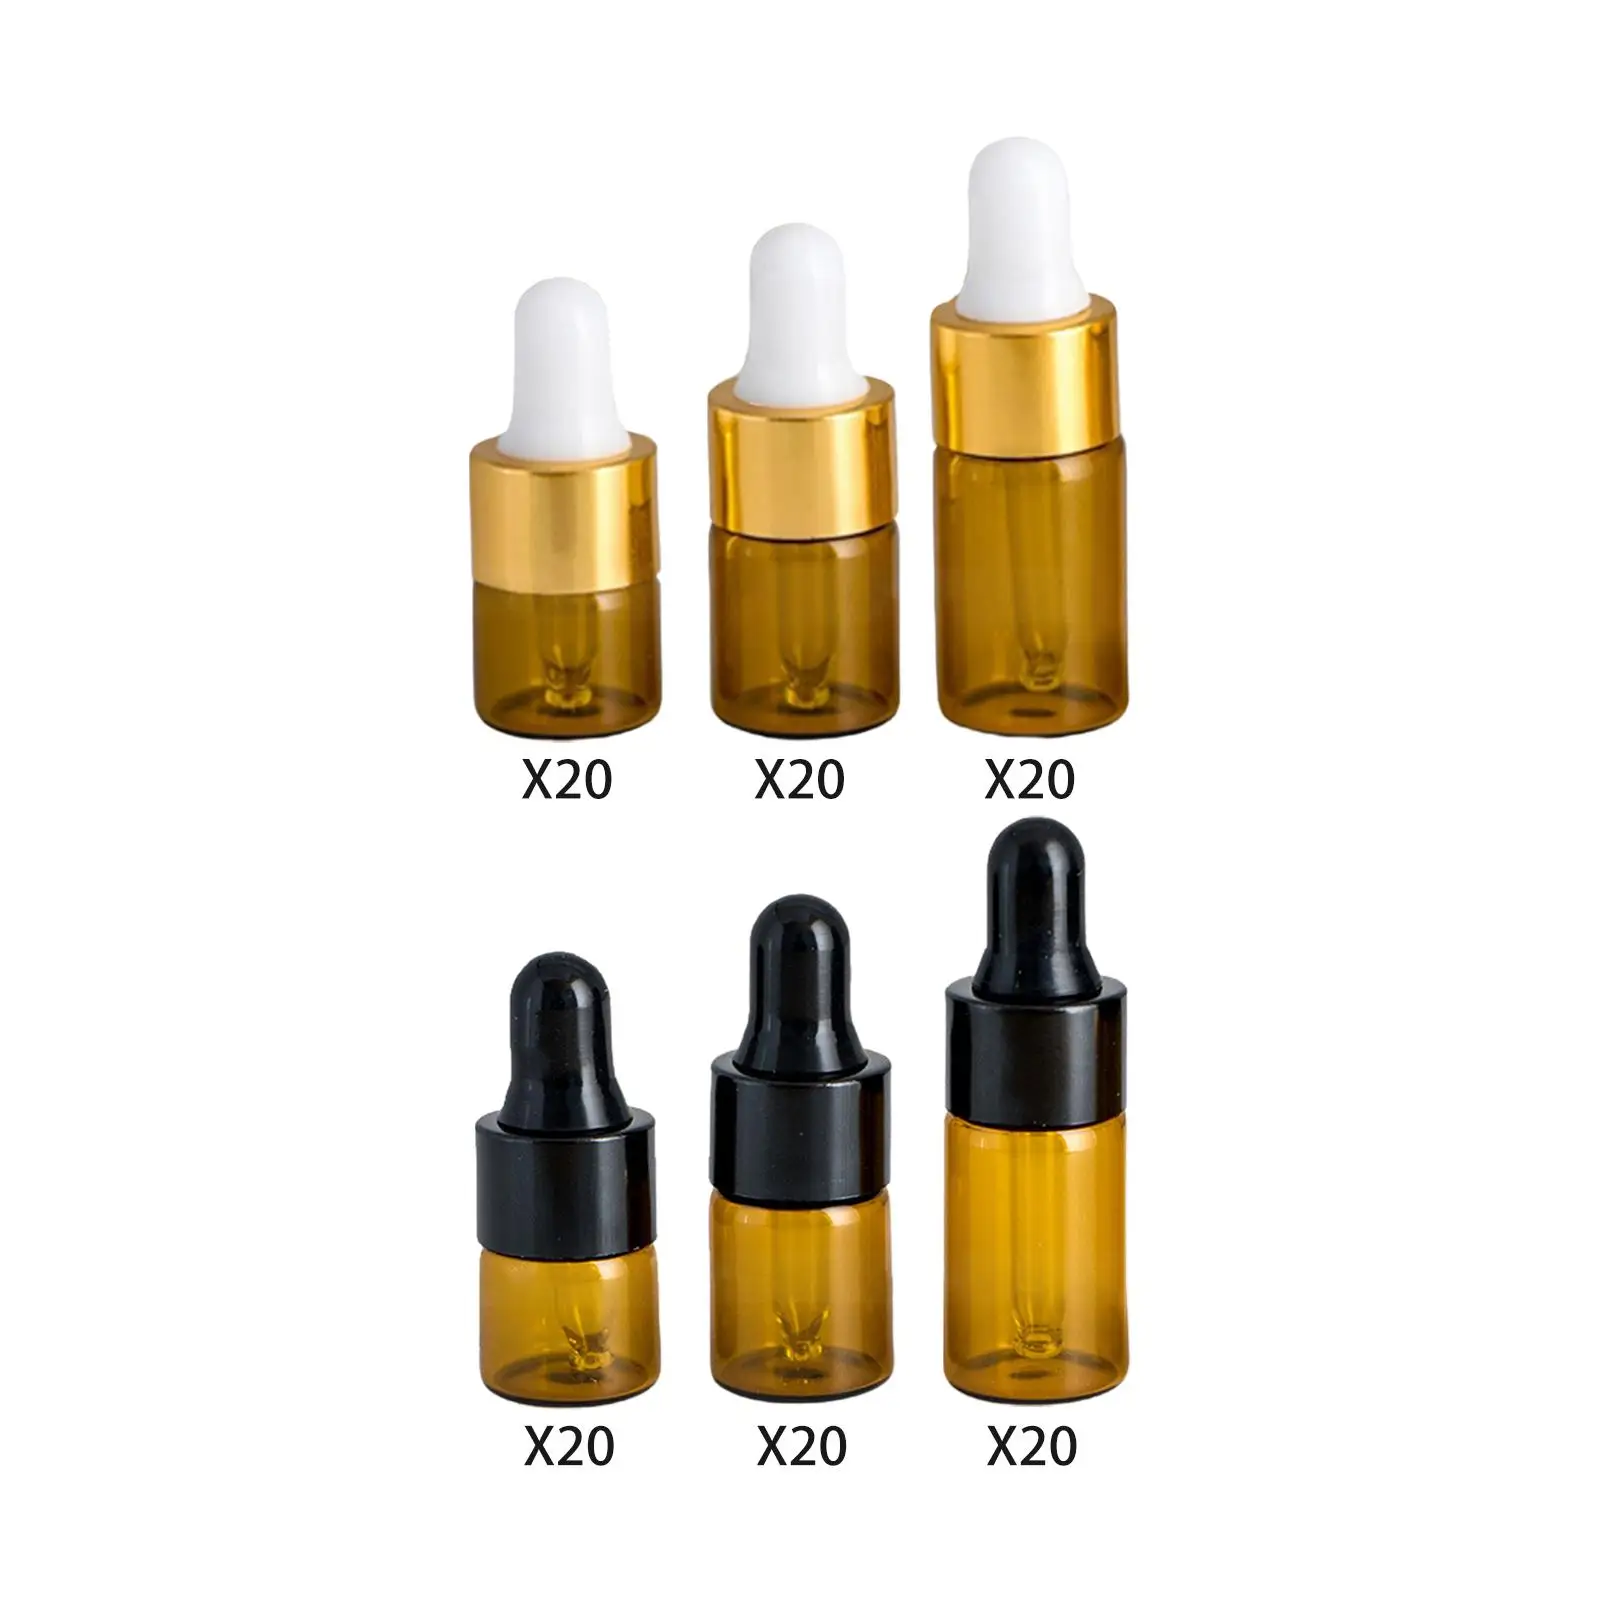 Small Dropper Bottles with Glass Eye Dropper Leakproof Sample Vial Portable Essential Oil Bottle for Essential Oils Body Oils